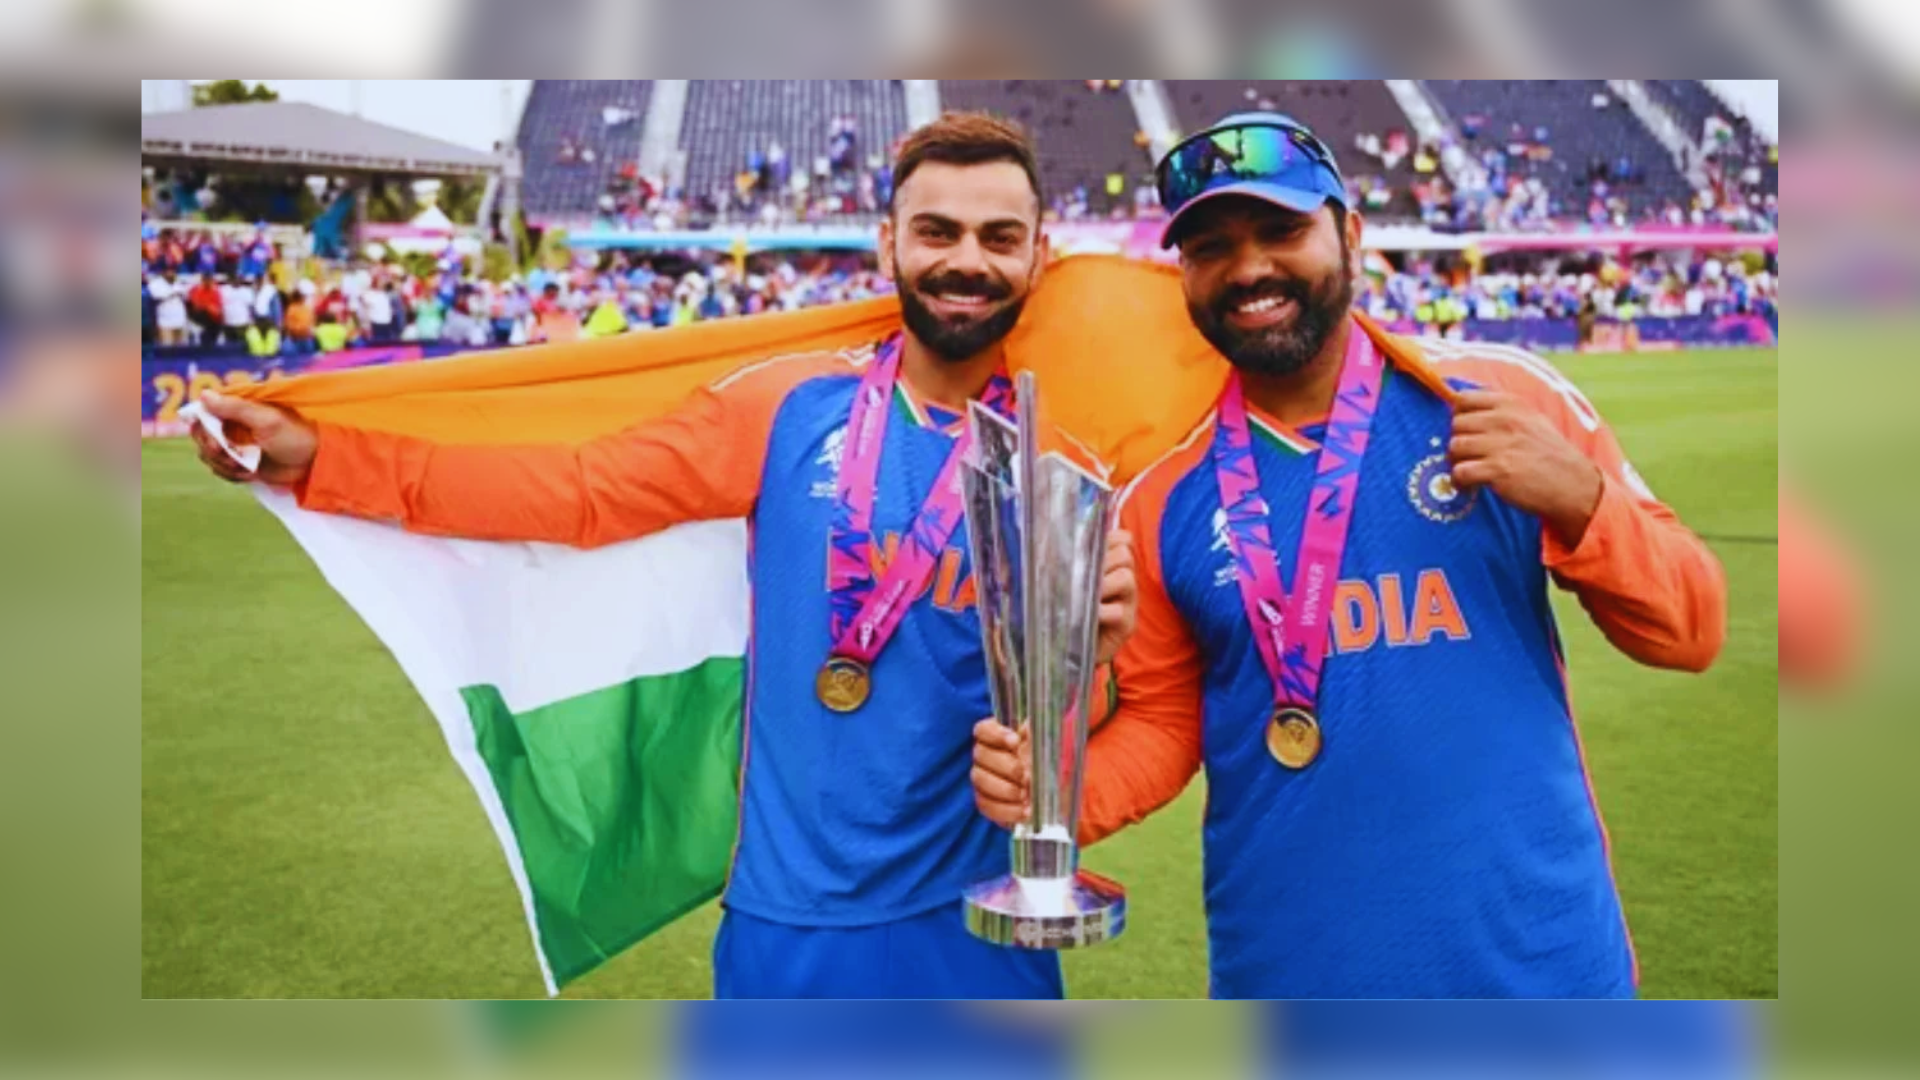 Team India Victory Parade: Kohli And Rohit Raise World Cup In Triumphal March To Wankhede